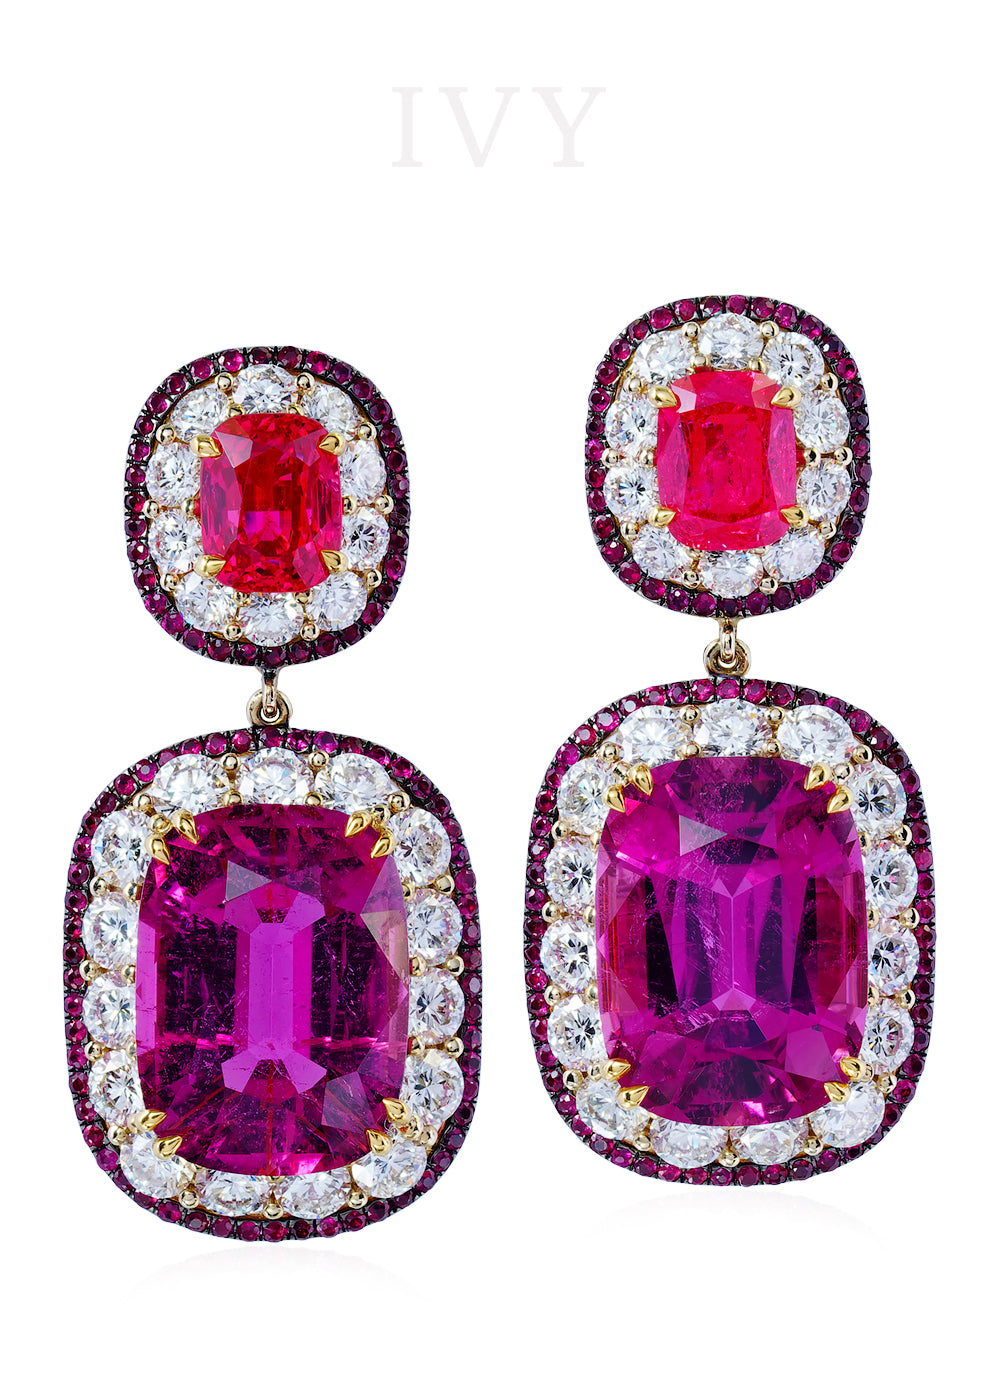 L’amoureuse Earrings with Rubellite, Red Spinel and Diamond